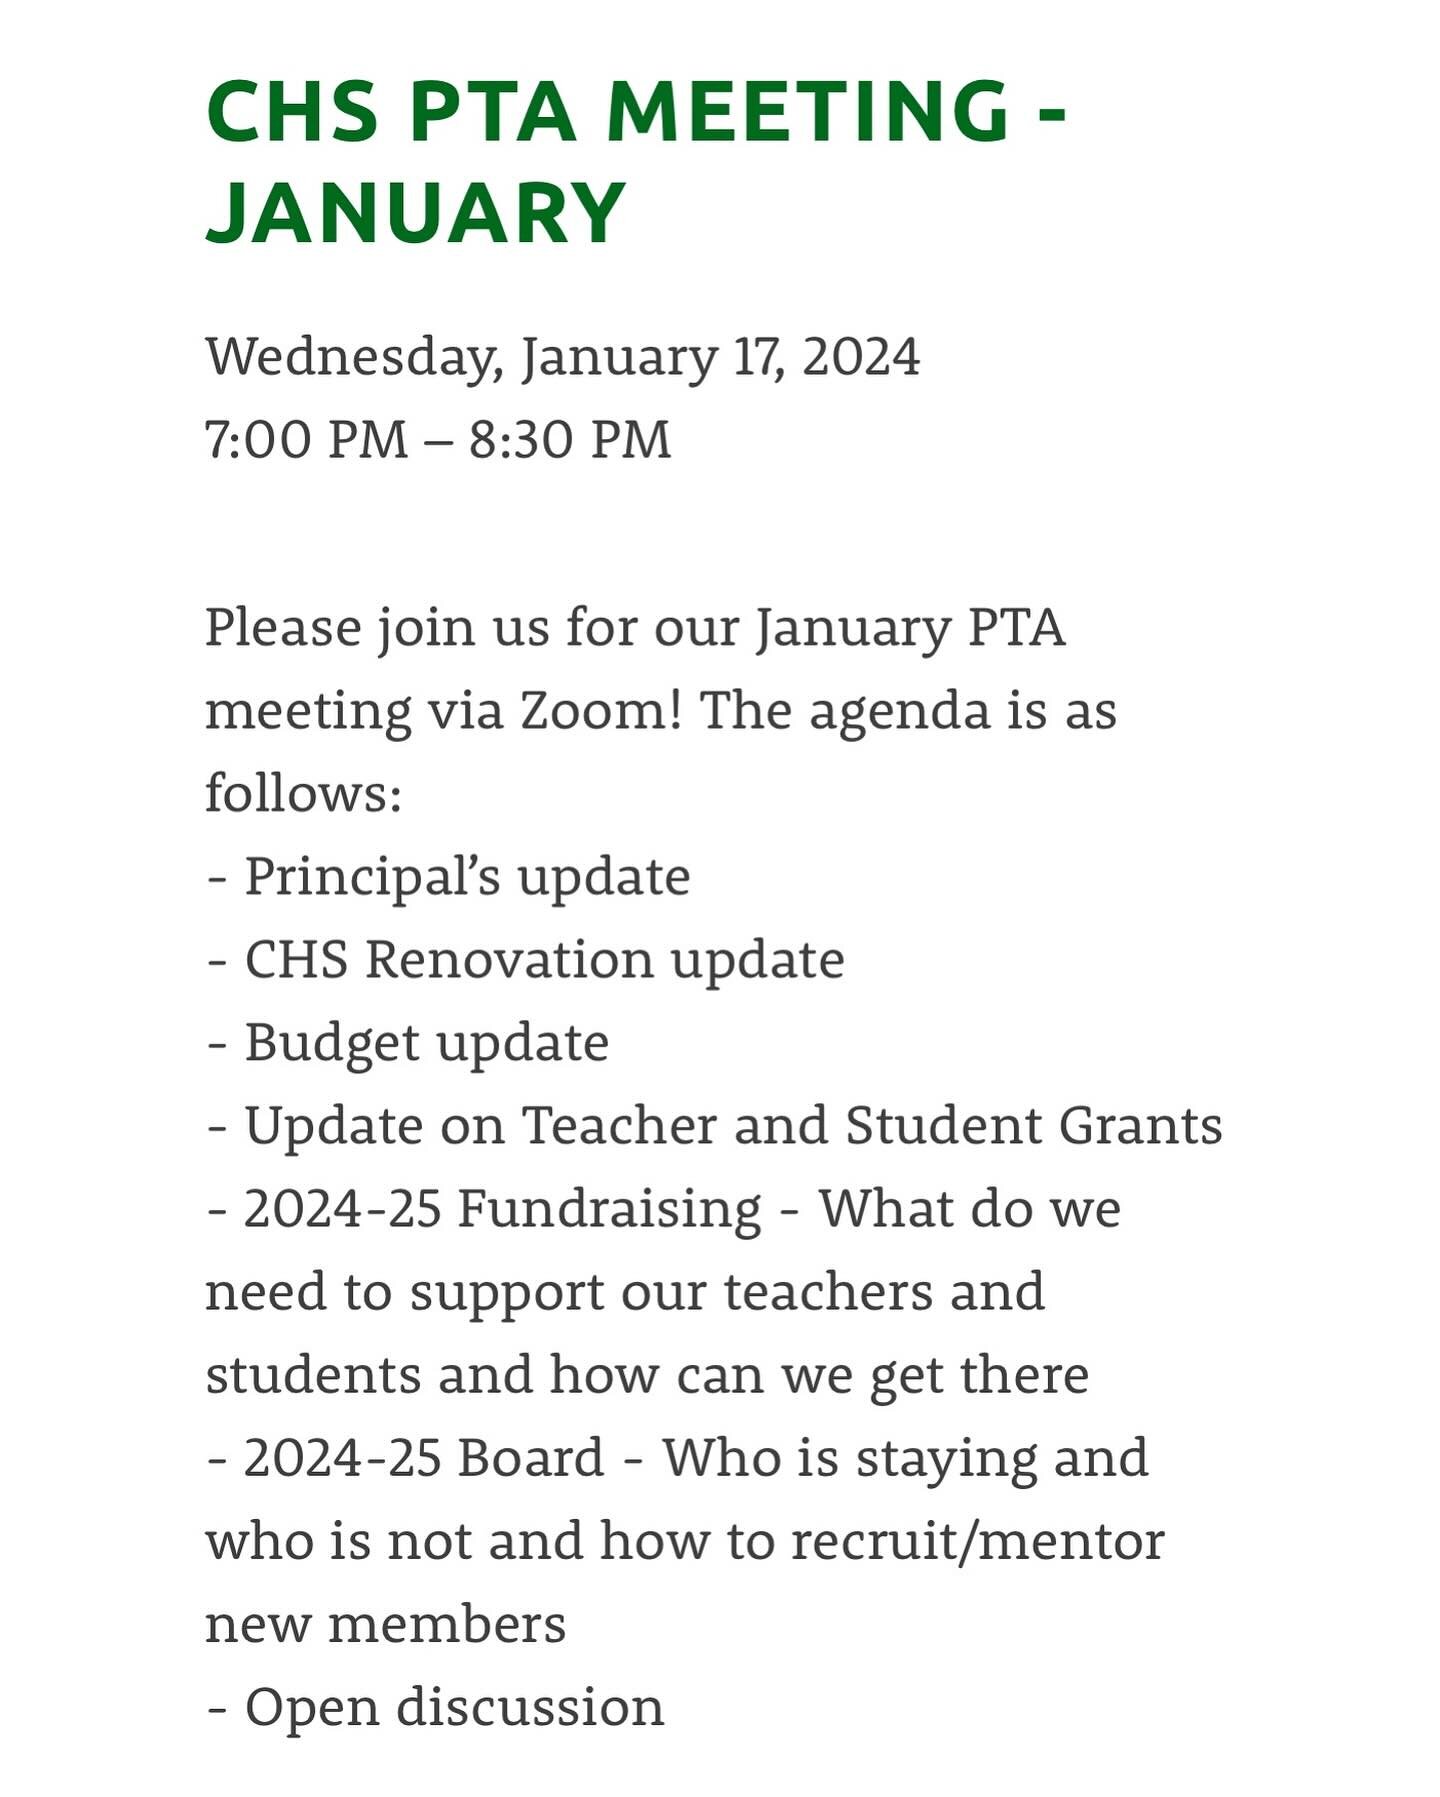 Please join us for our January PTA meeting via Zoom on Wednesday 1/17 at 7pm! The agenda is as follows:
- Principal&rsquo;s update
- CHS Renovation update
- Budget update
- Update on Teacher and Student Grants
- 2024-25 Fundraising - What do we need 